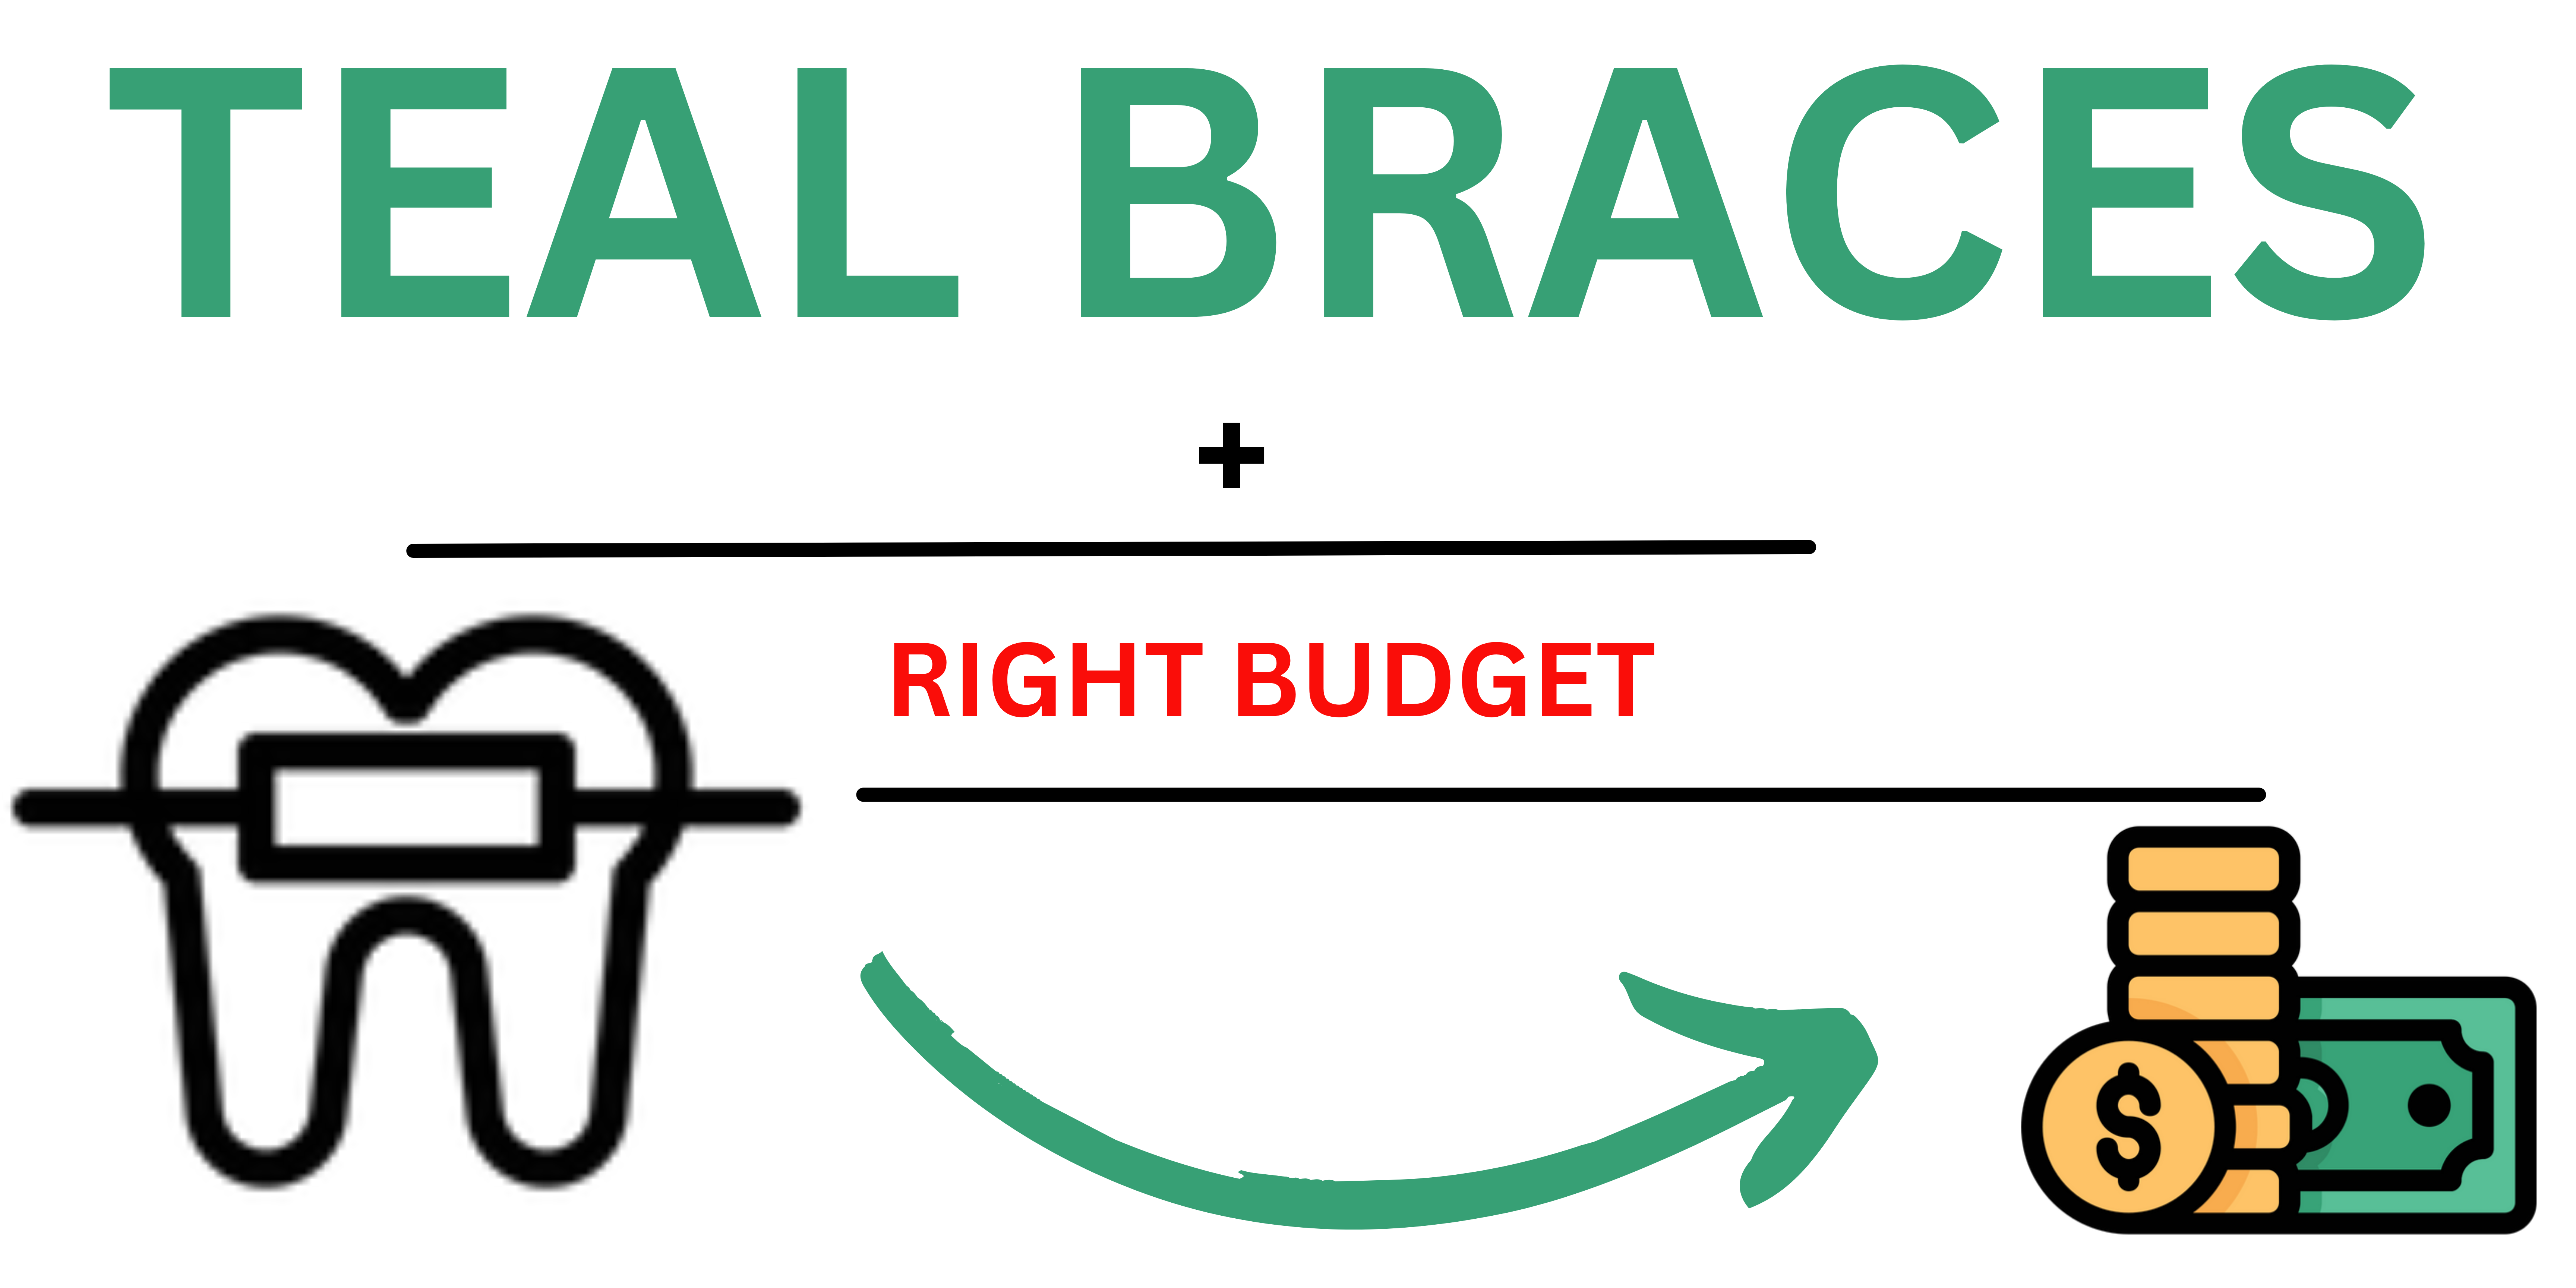 Teal Braces | How To Choose The Right Braces For Your Budget